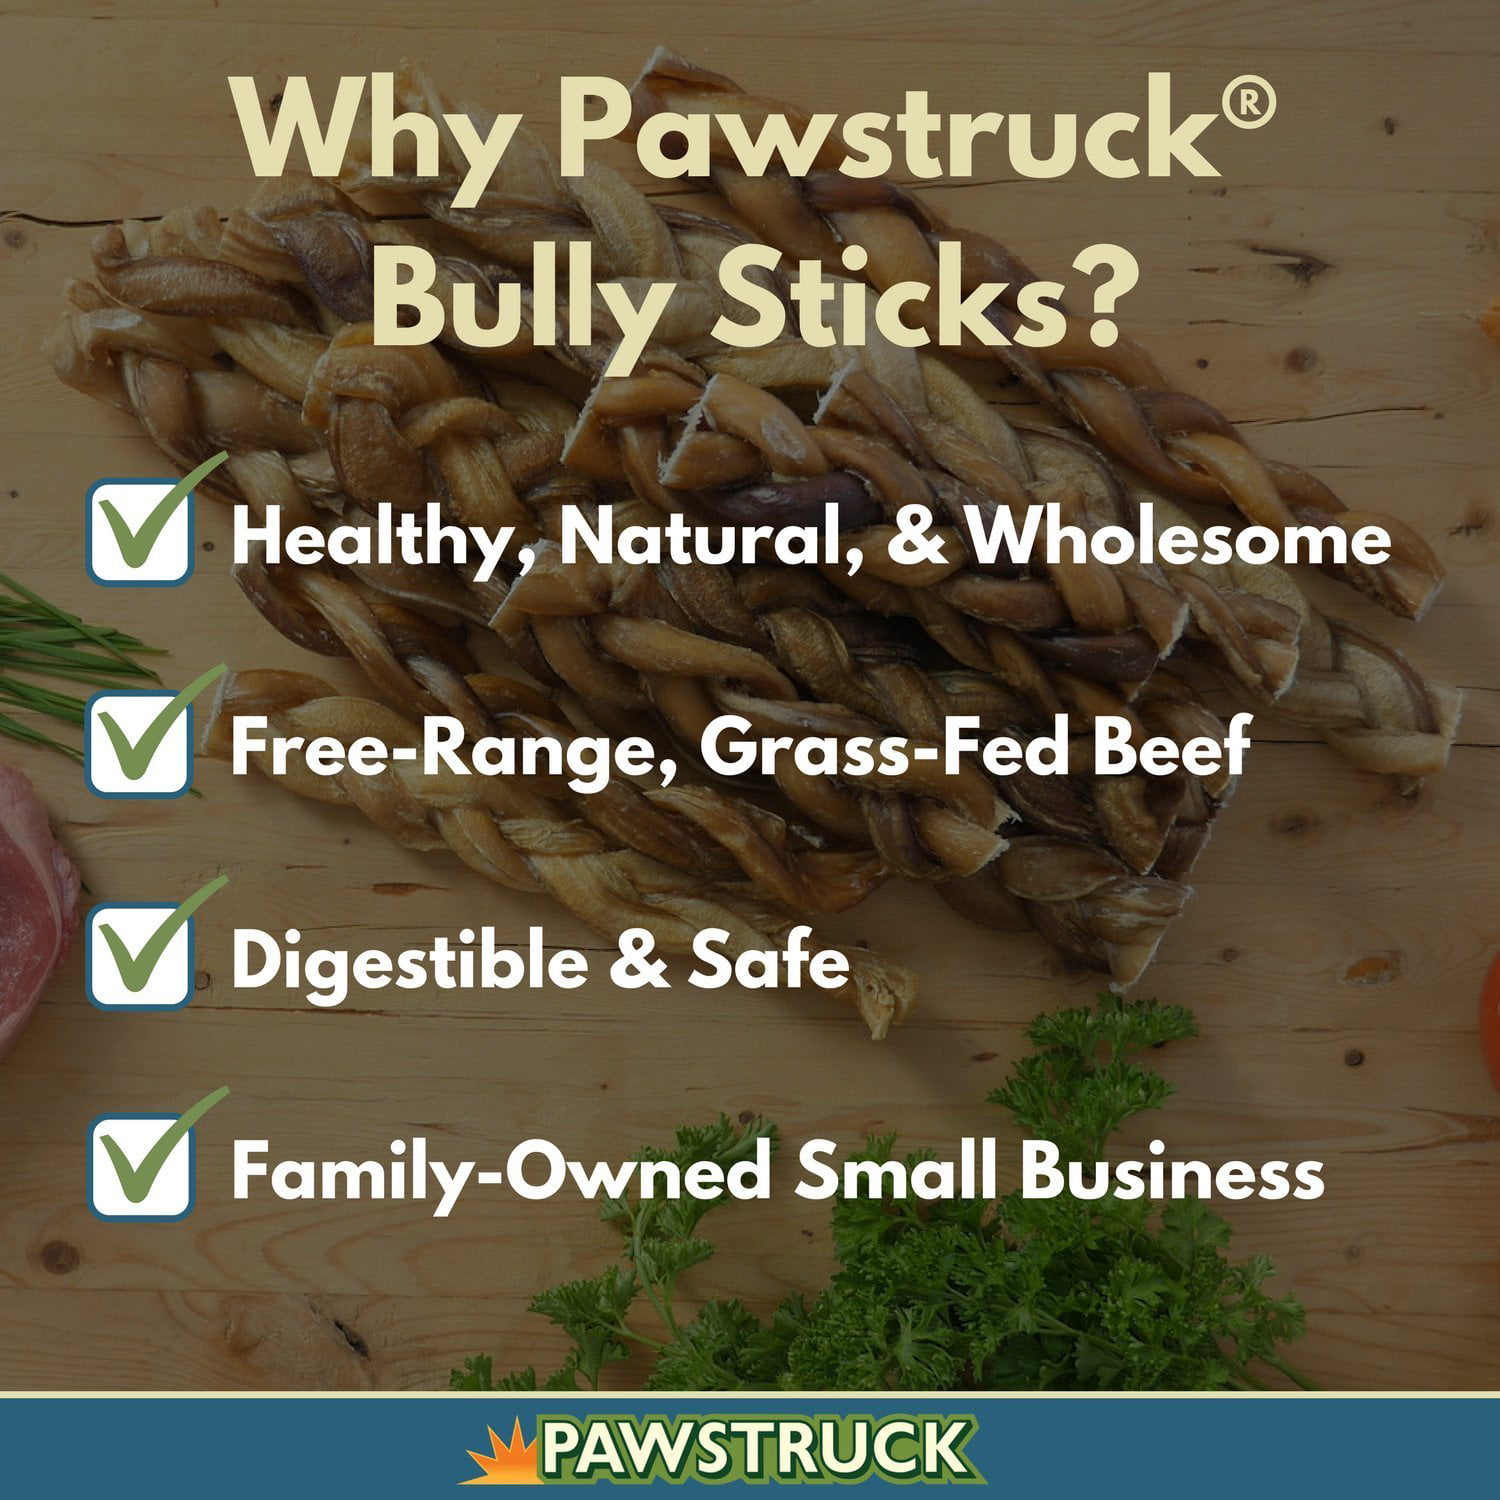 Pawstruck 7 Braided Bully Sticks for Dogs Natural Bulk Dog Dental Treats & Healthy Chews 7 inch Best Low Odor Pizzle Stix Chemical Free 